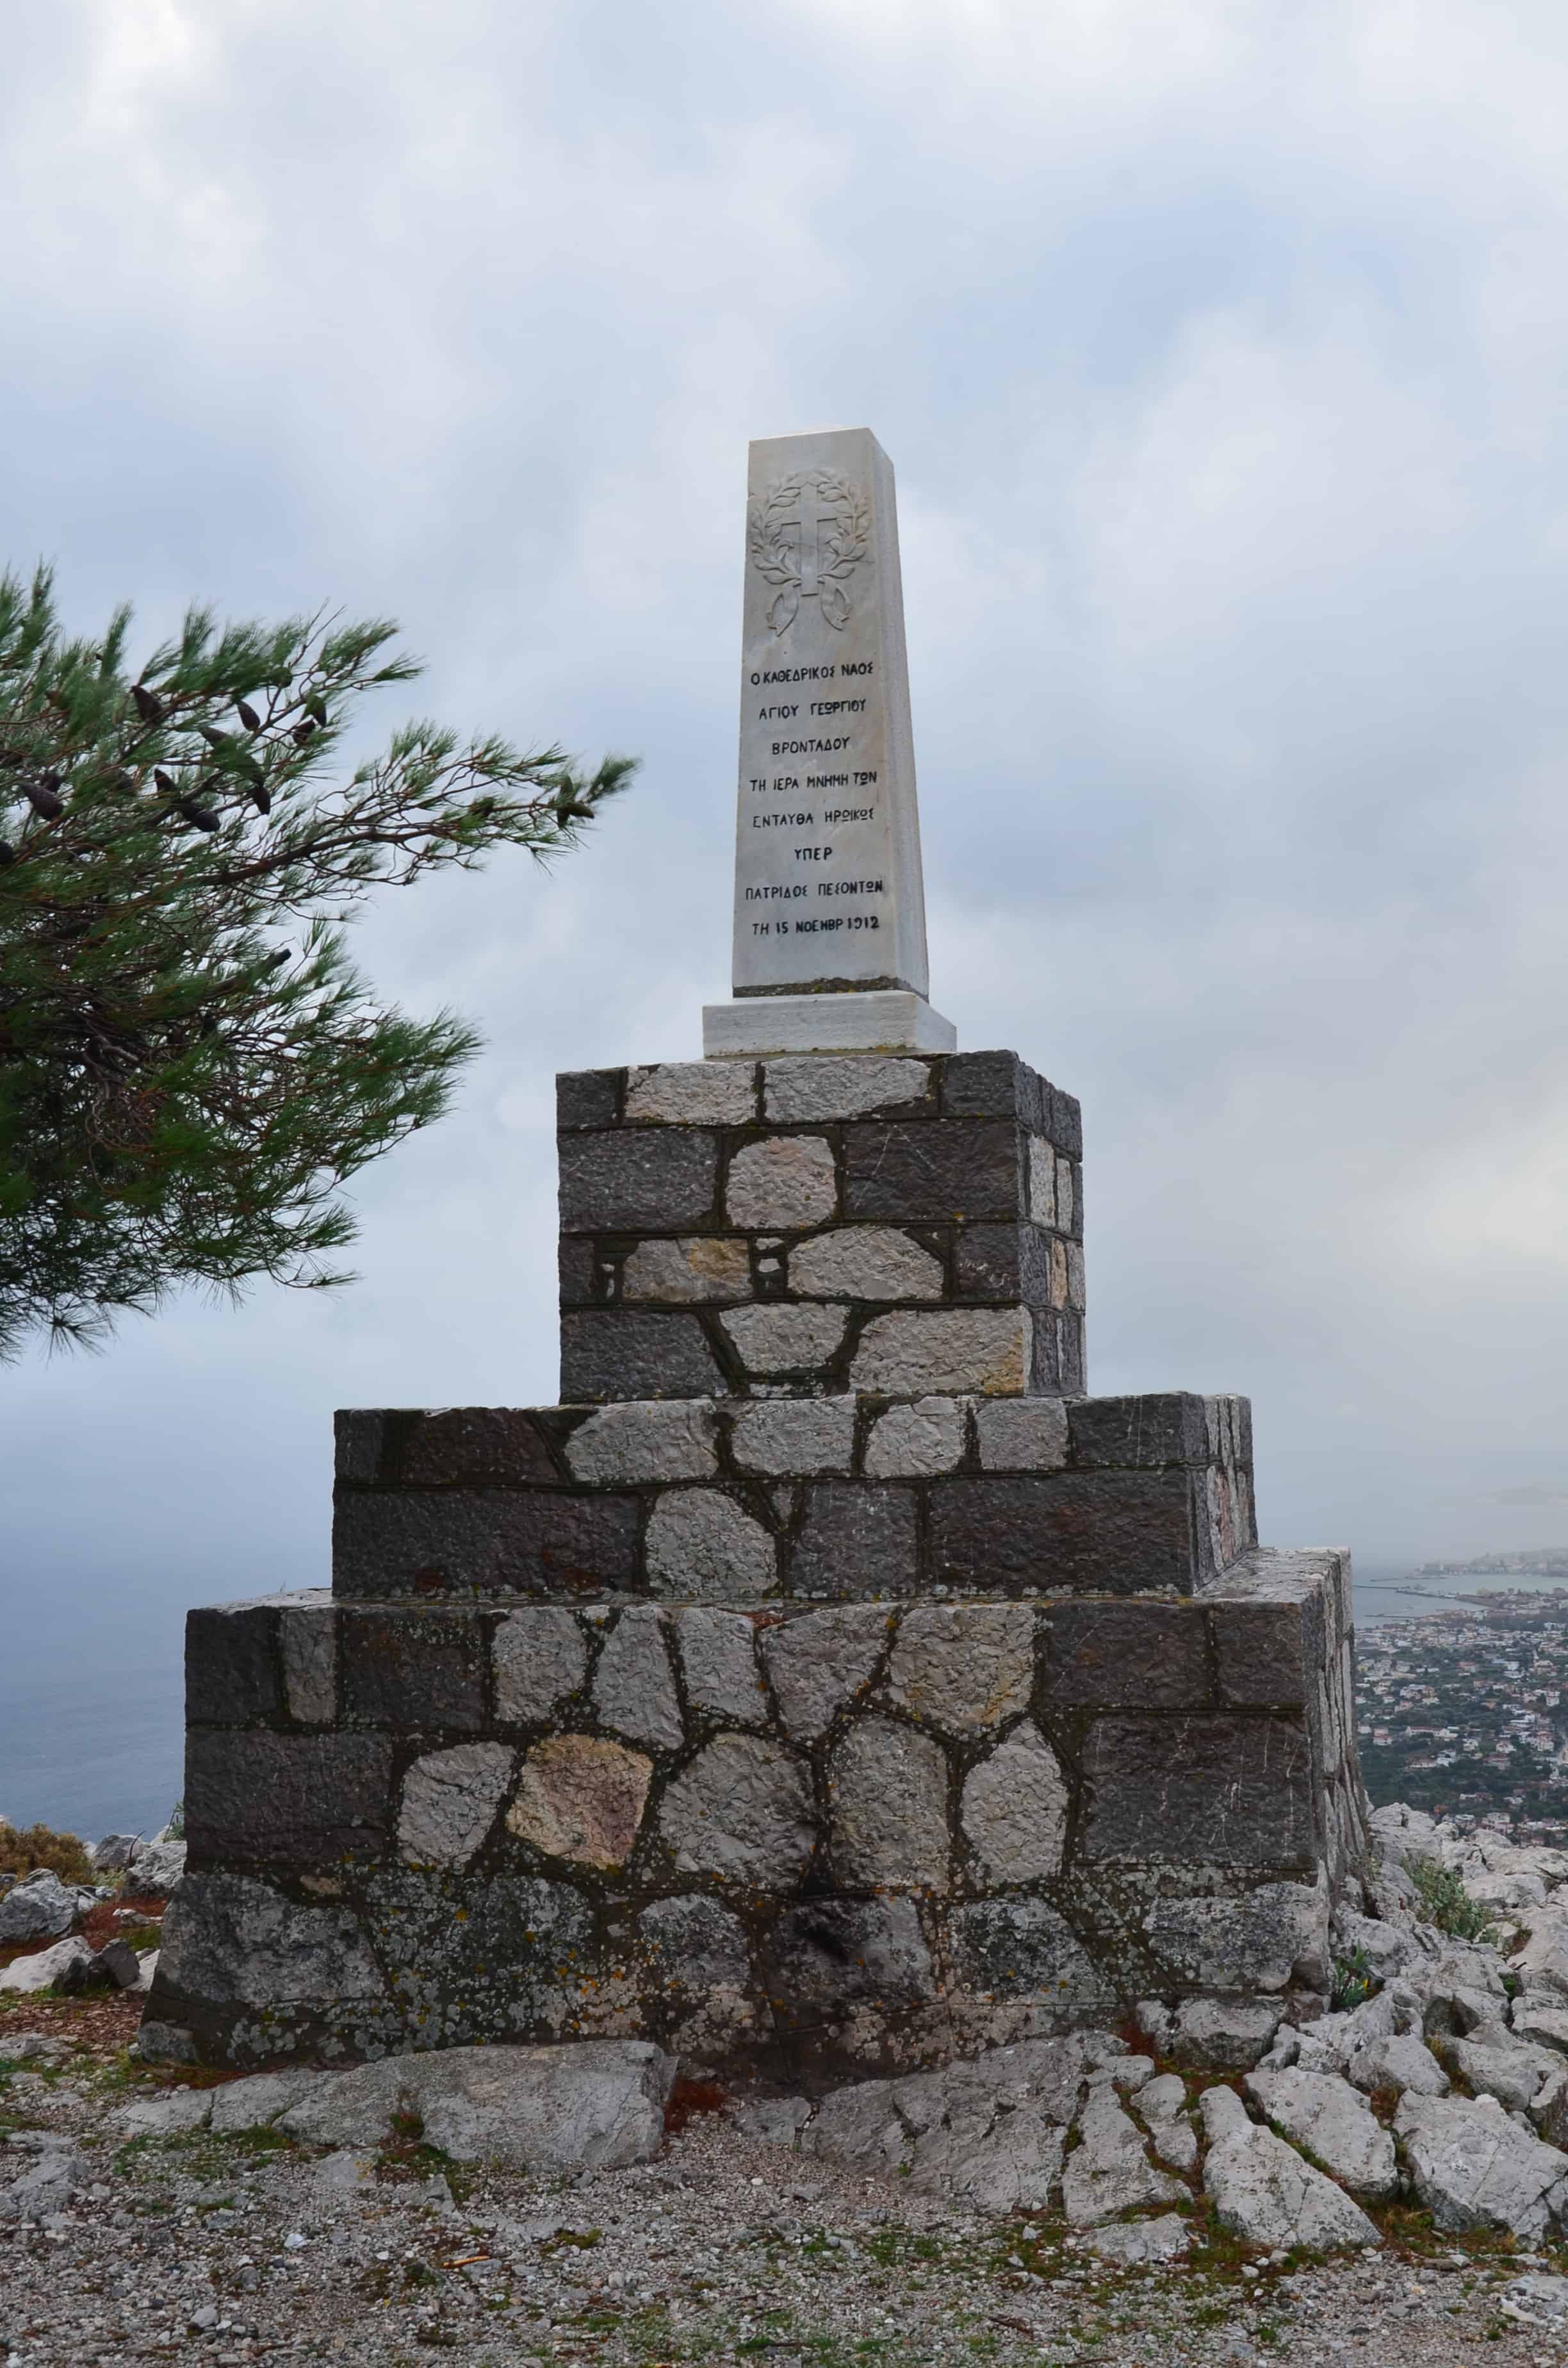 Heroes Monument in Vrontados, Chios, Greece